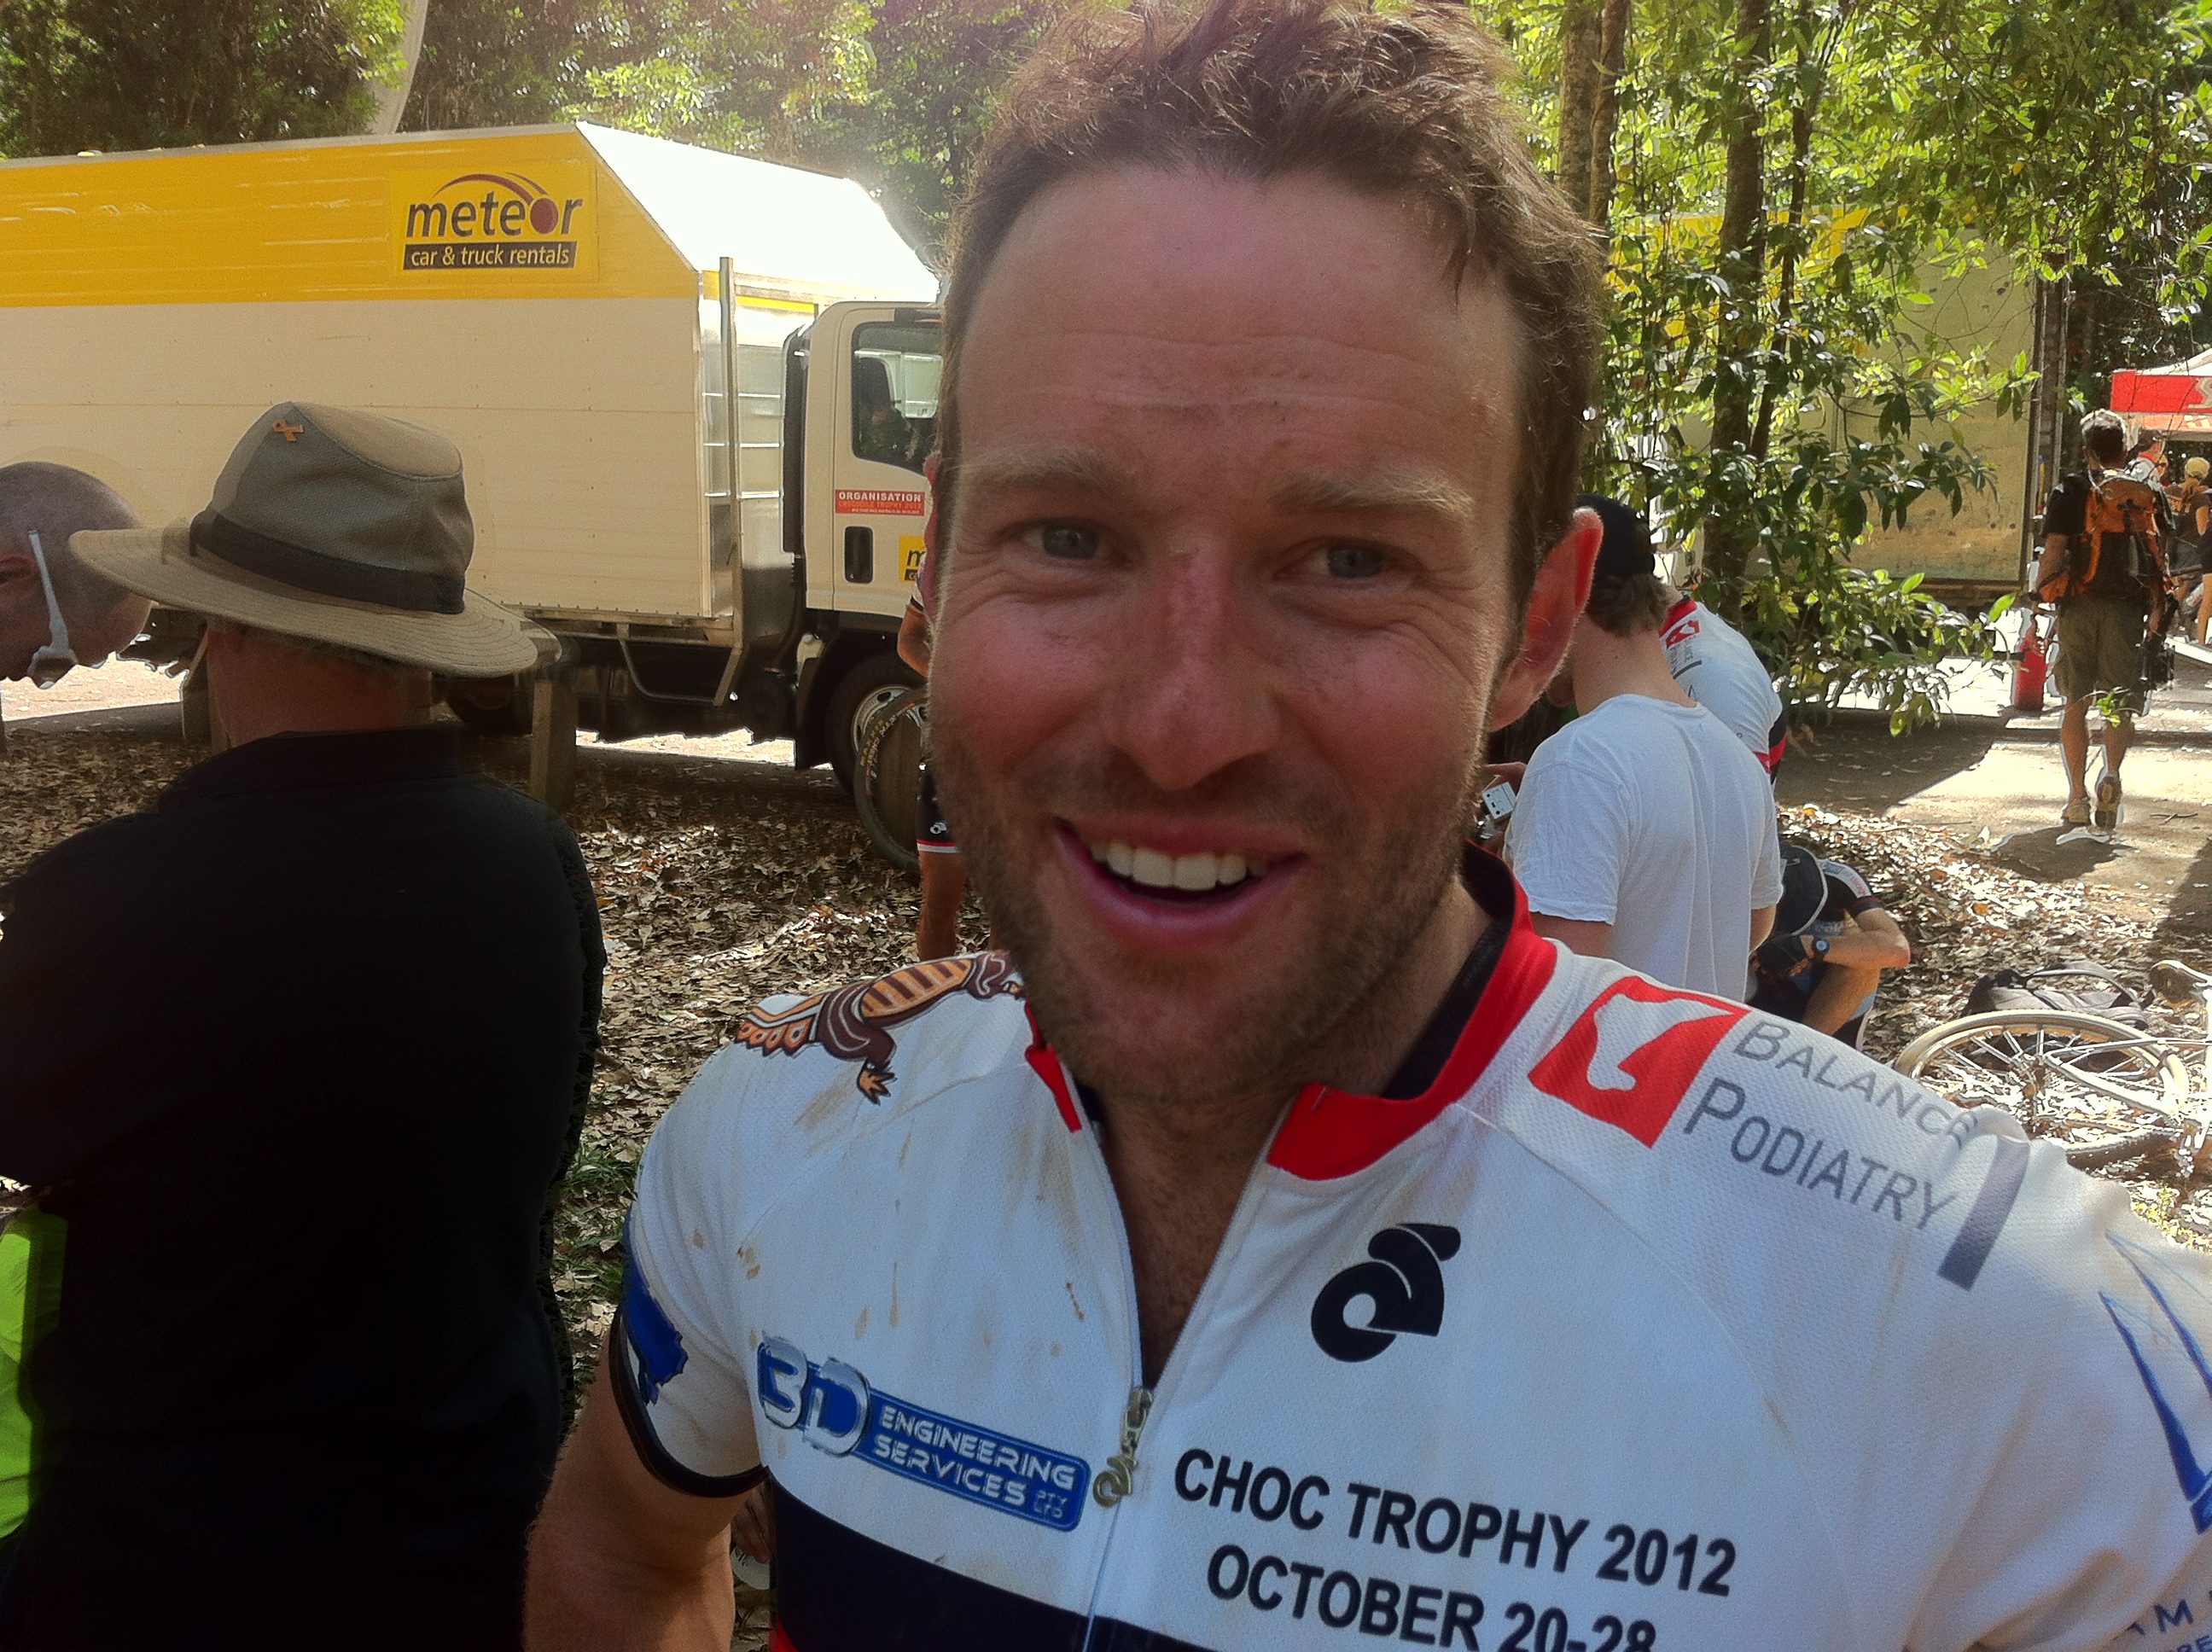 Jason English finished 3rd in the Croc 1st Stage. Great backing up after winning the Scott 24hr solo one week earlier.